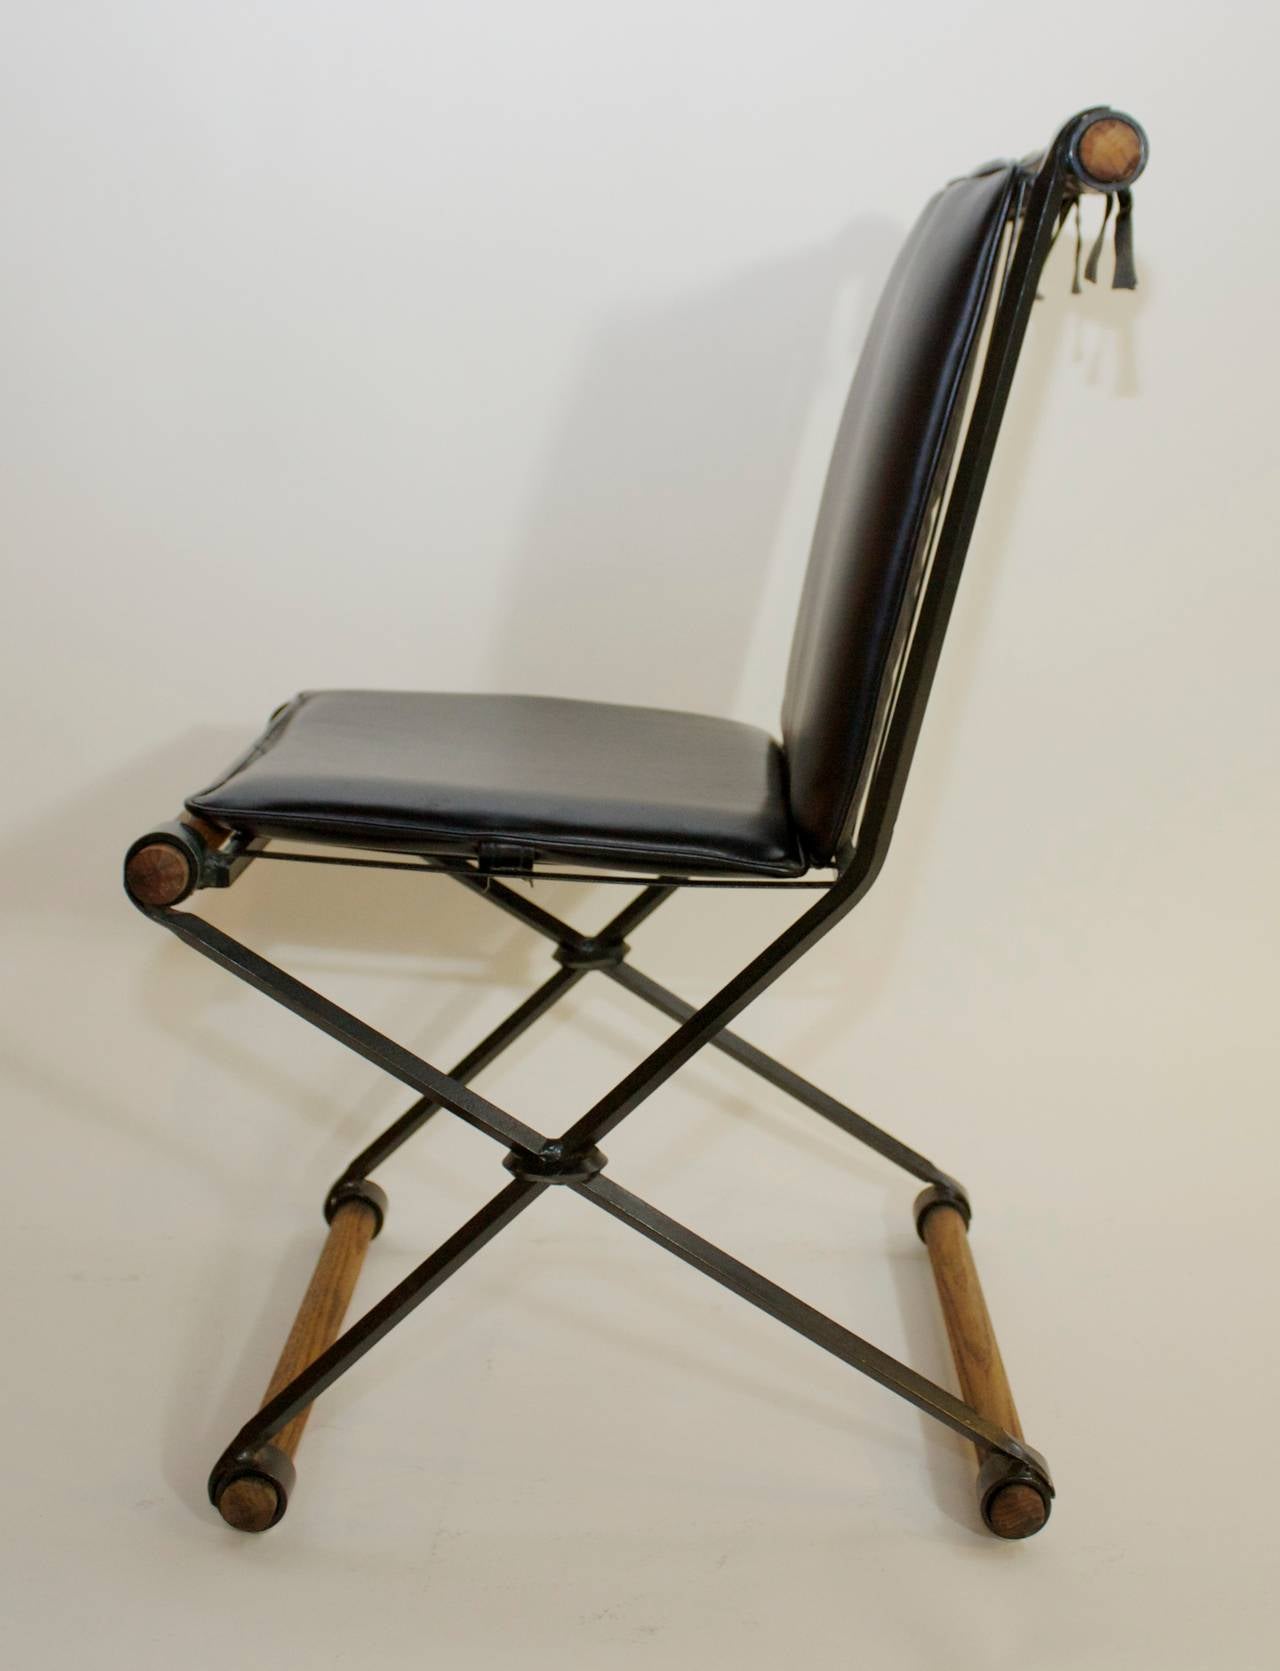 Blackened Set of Four Campaign Style Chairs by Cleo Baldon